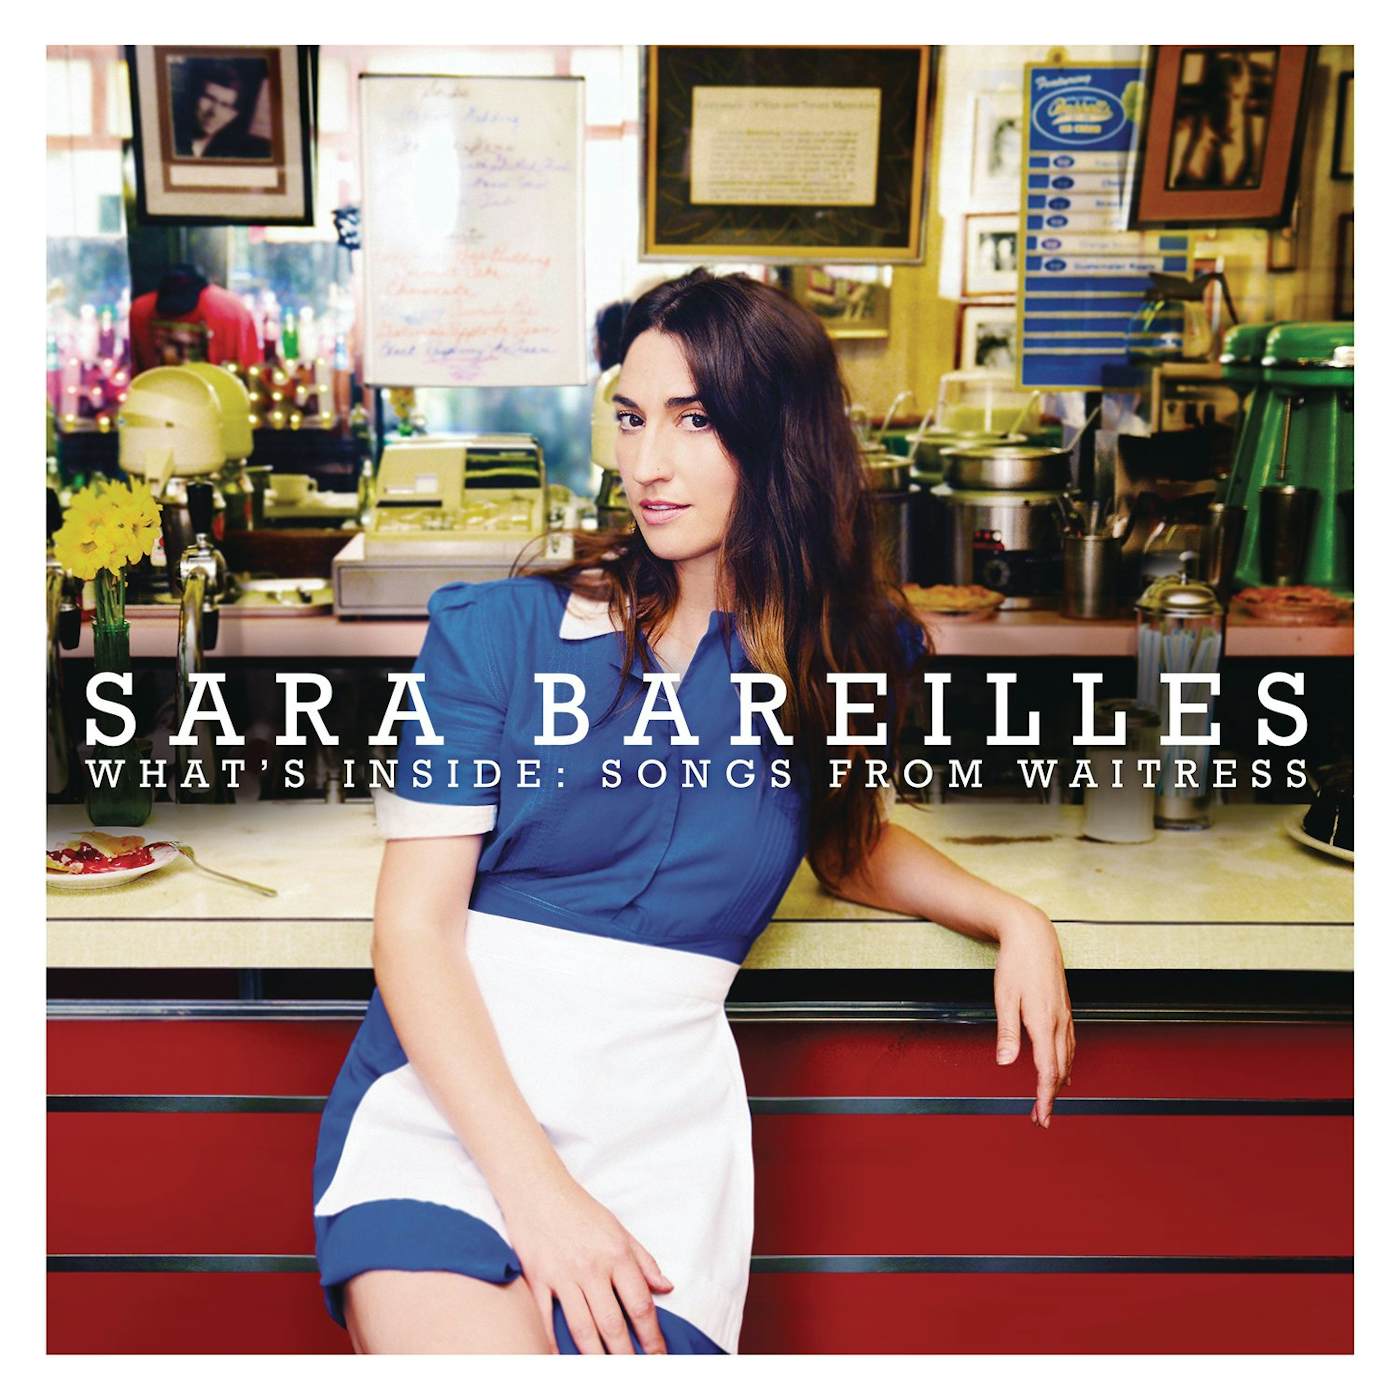 Sara Bareilles What's Inside: Songs from Waitress CD Deluxe